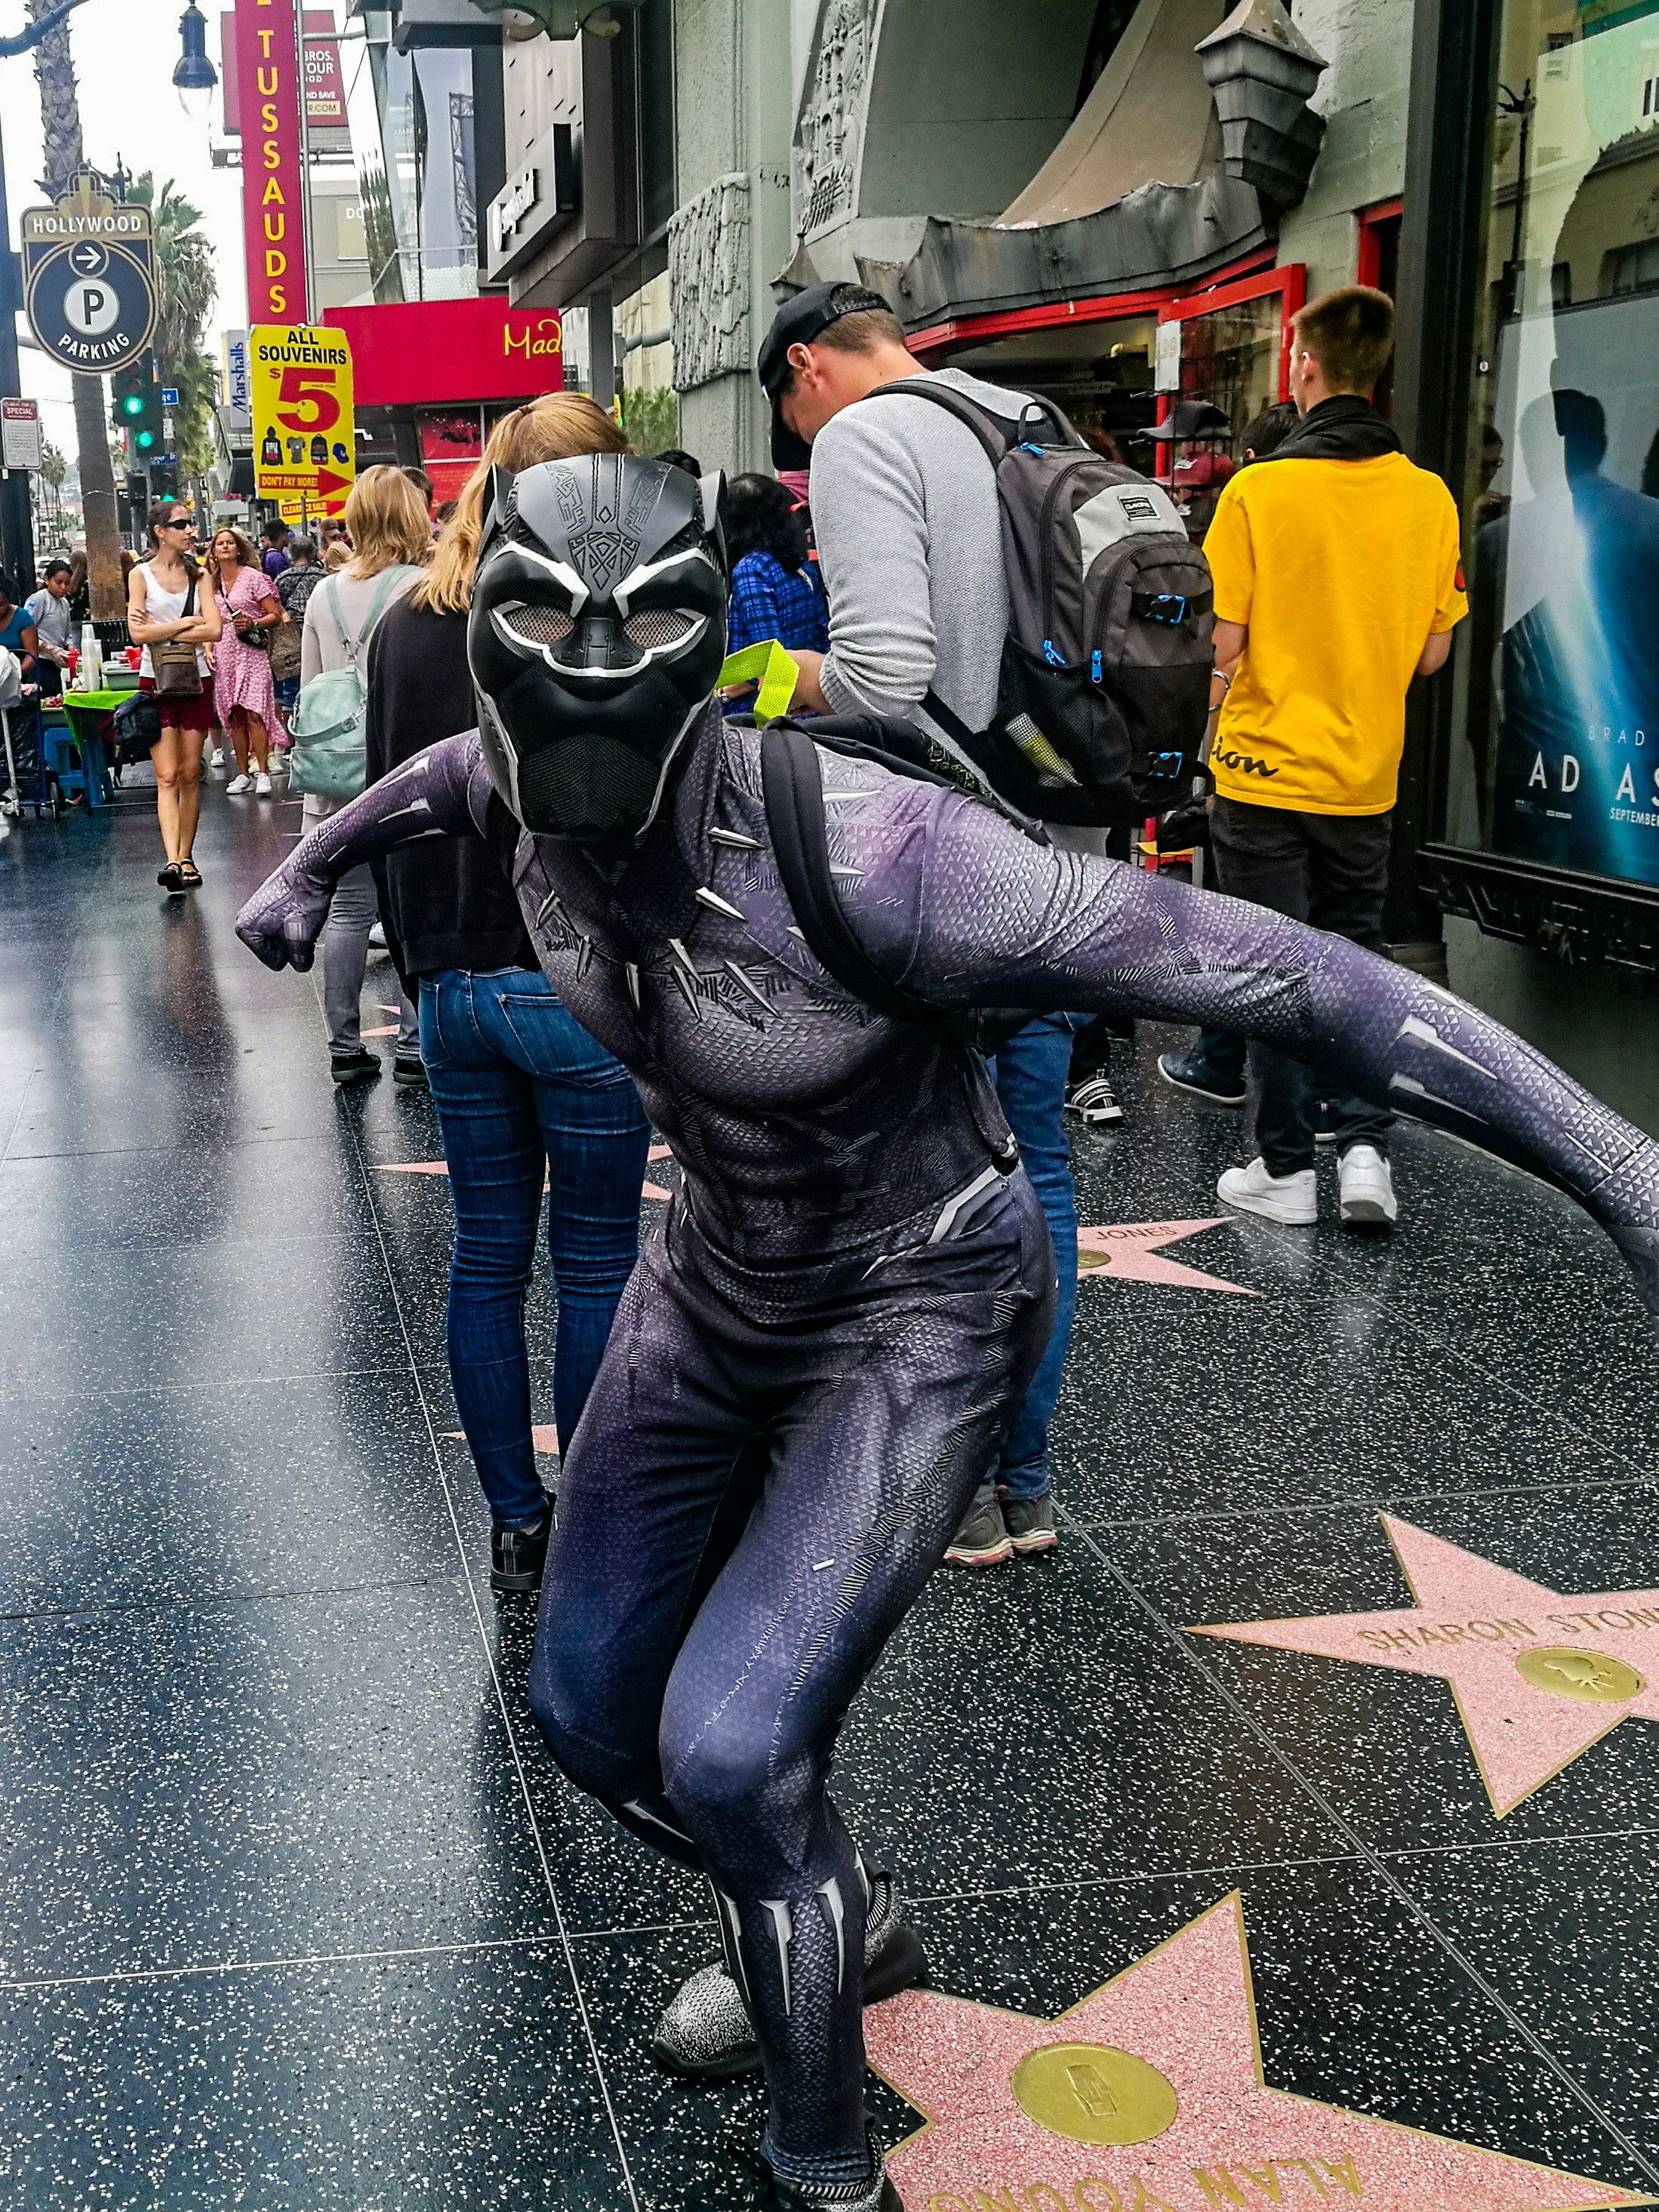 Black Panther stands on the Hollywood Walk of Fame, with people in the background